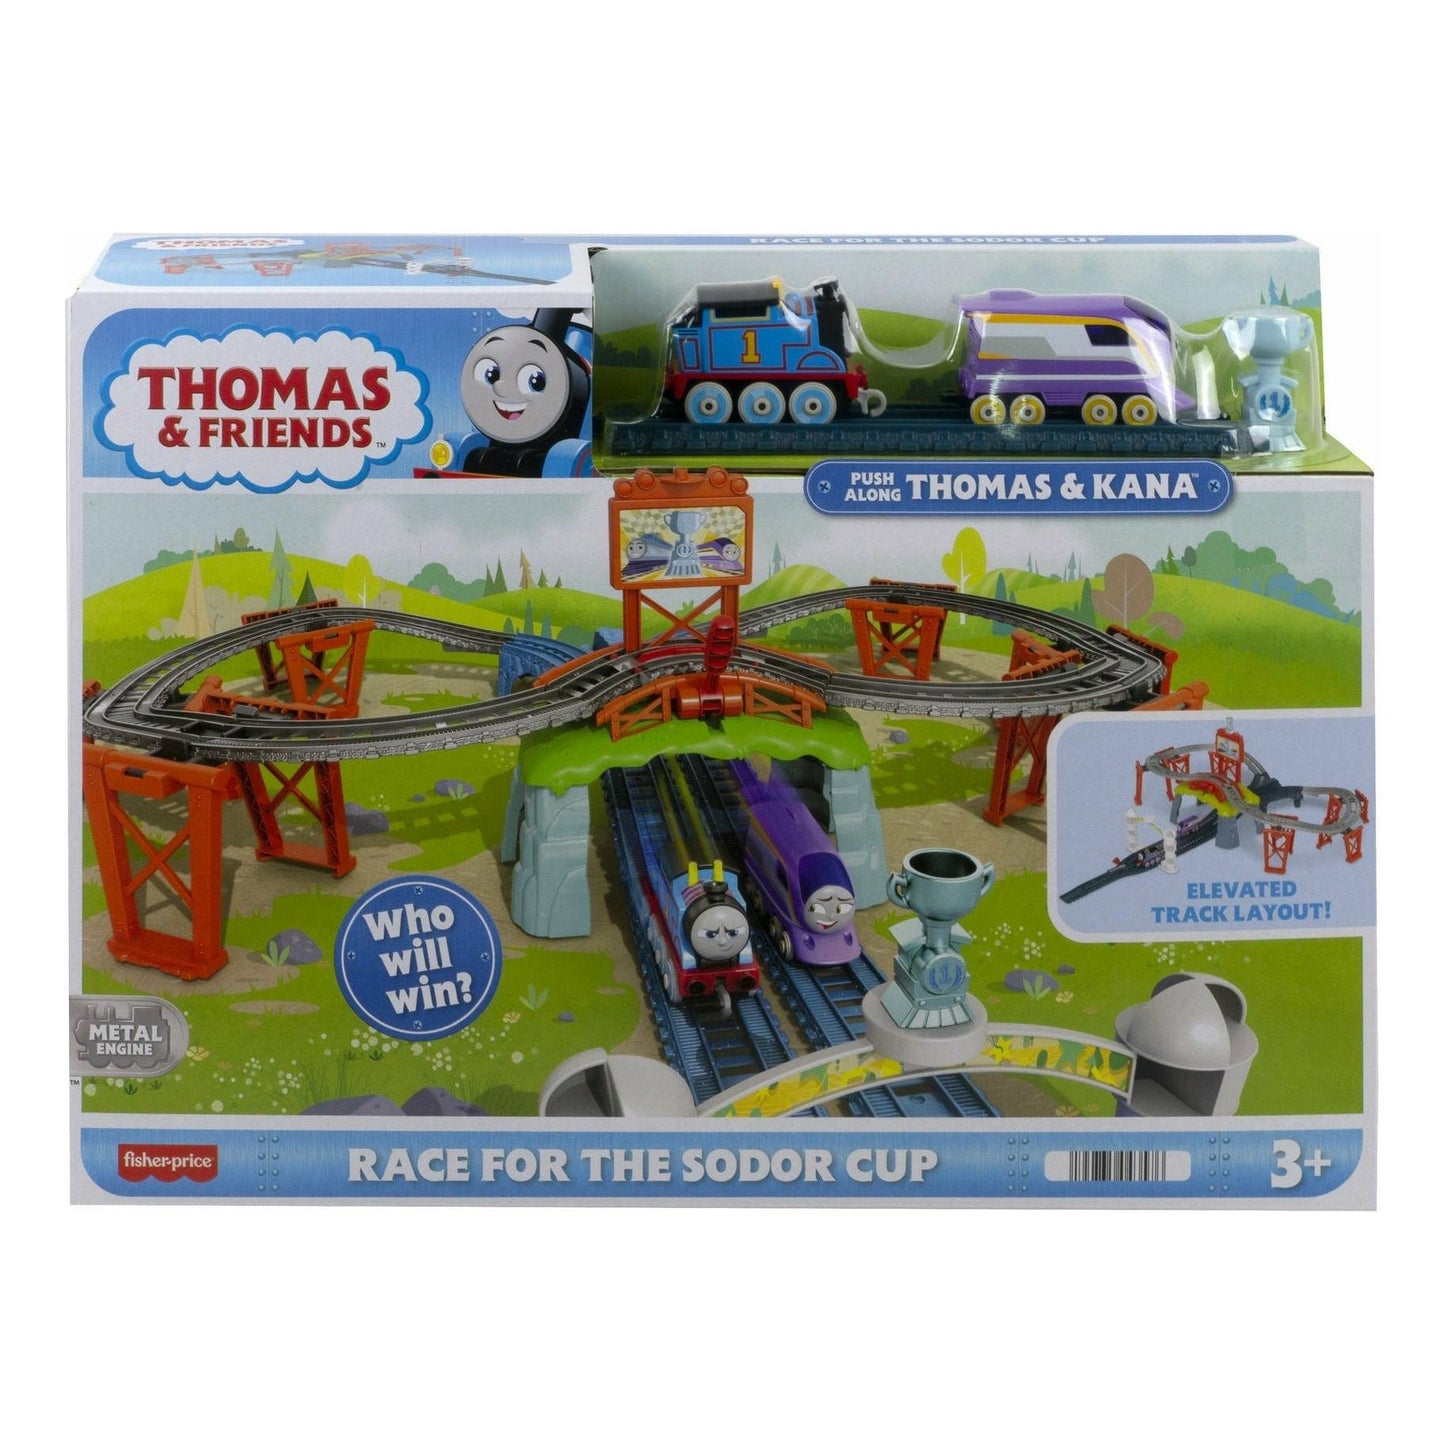 Thomas & Friends Race For The Sodor Cup Set